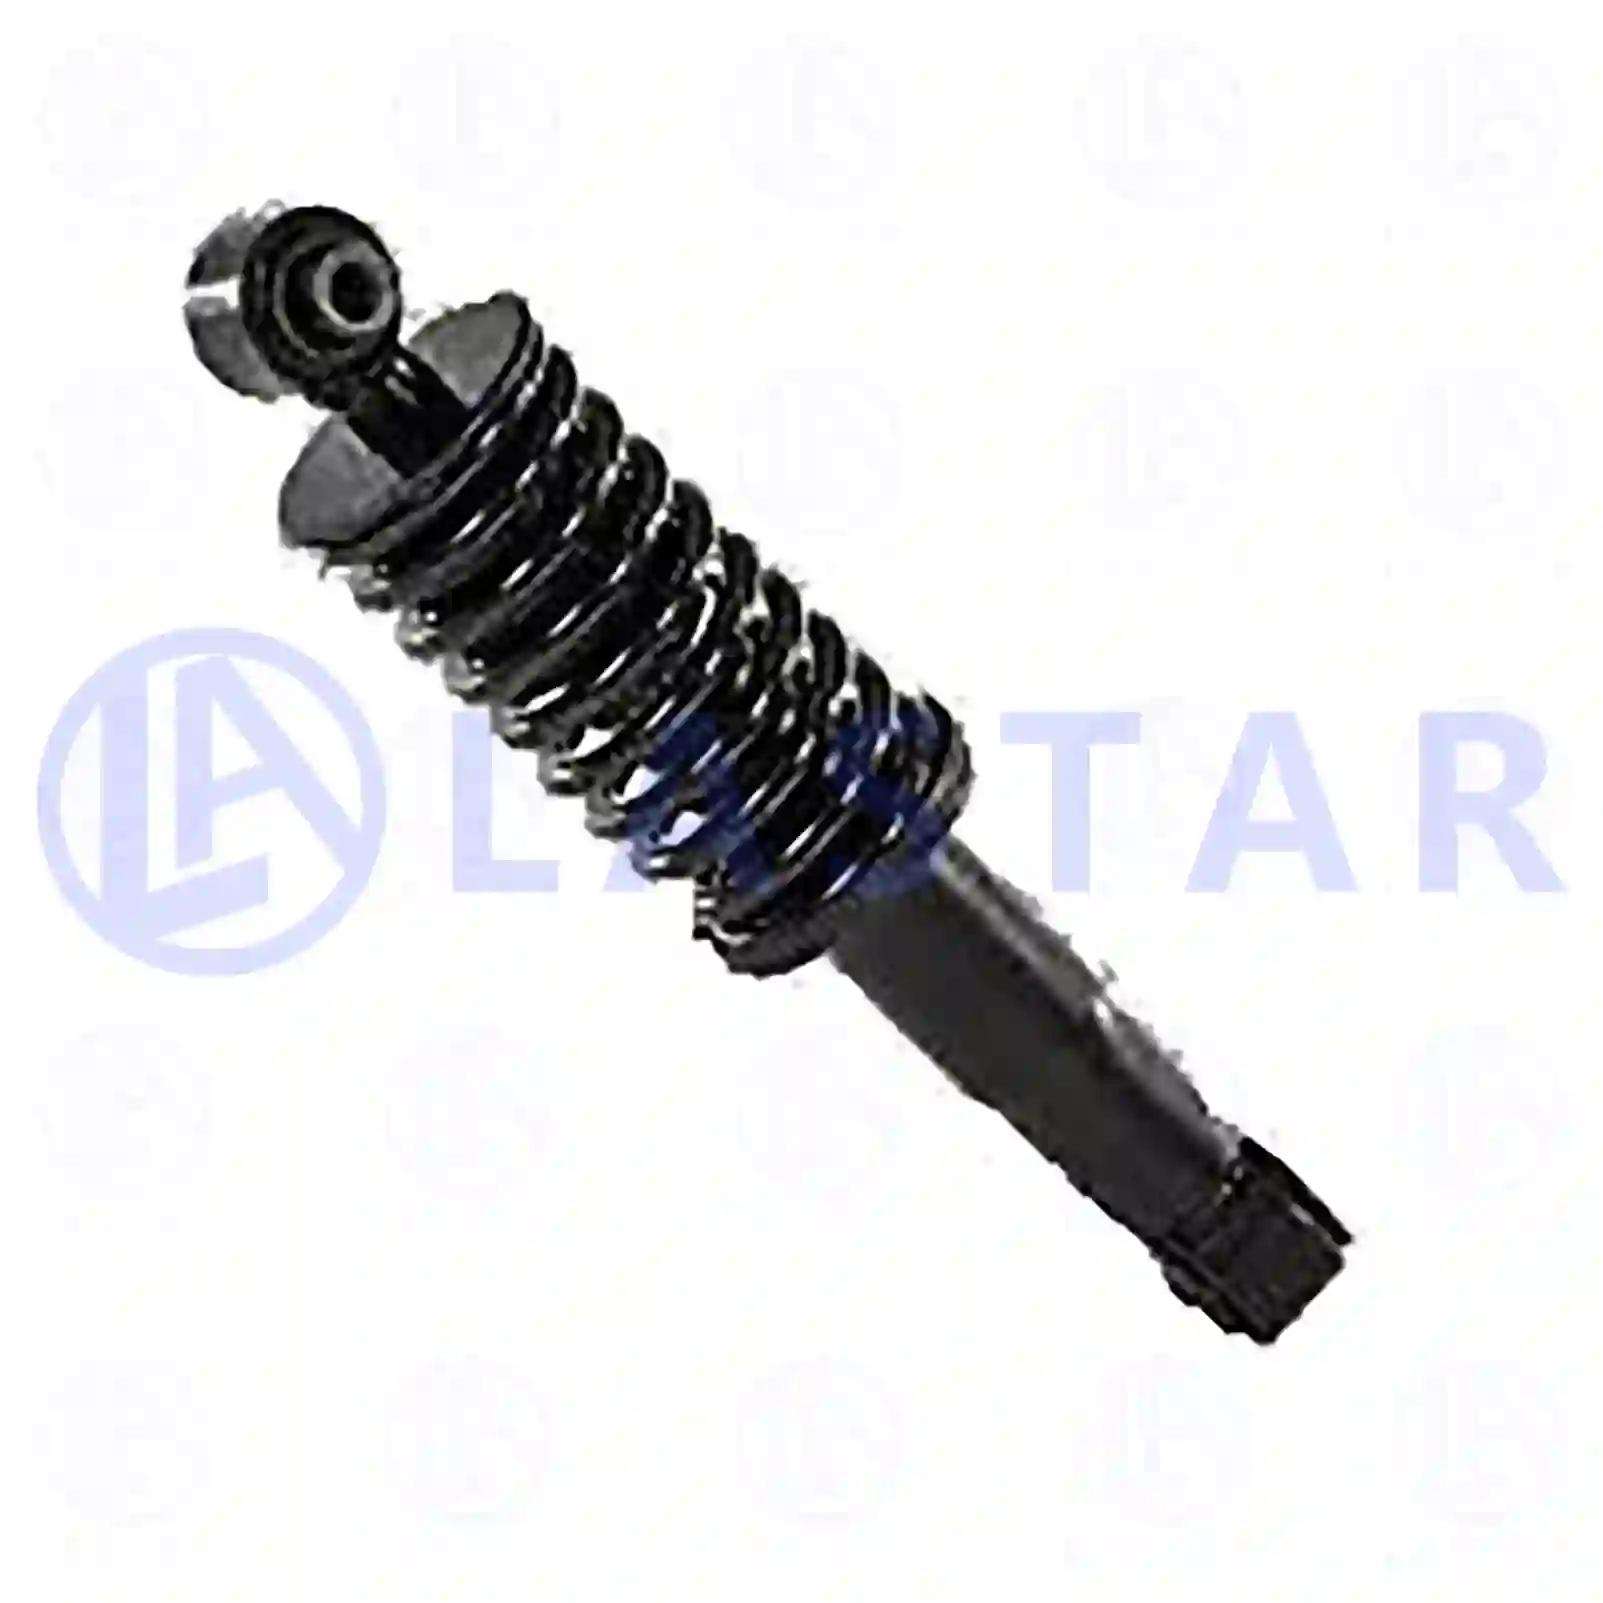 Cabin shock absorber, 77735609, 500387621 ||  77735609 Lastar Spare Part | Truck Spare Parts, Auotomotive Spare Parts Cabin shock absorber, 77735609, 500387621 ||  77735609 Lastar Spare Part | Truck Spare Parts, Auotomotive Spare Parts